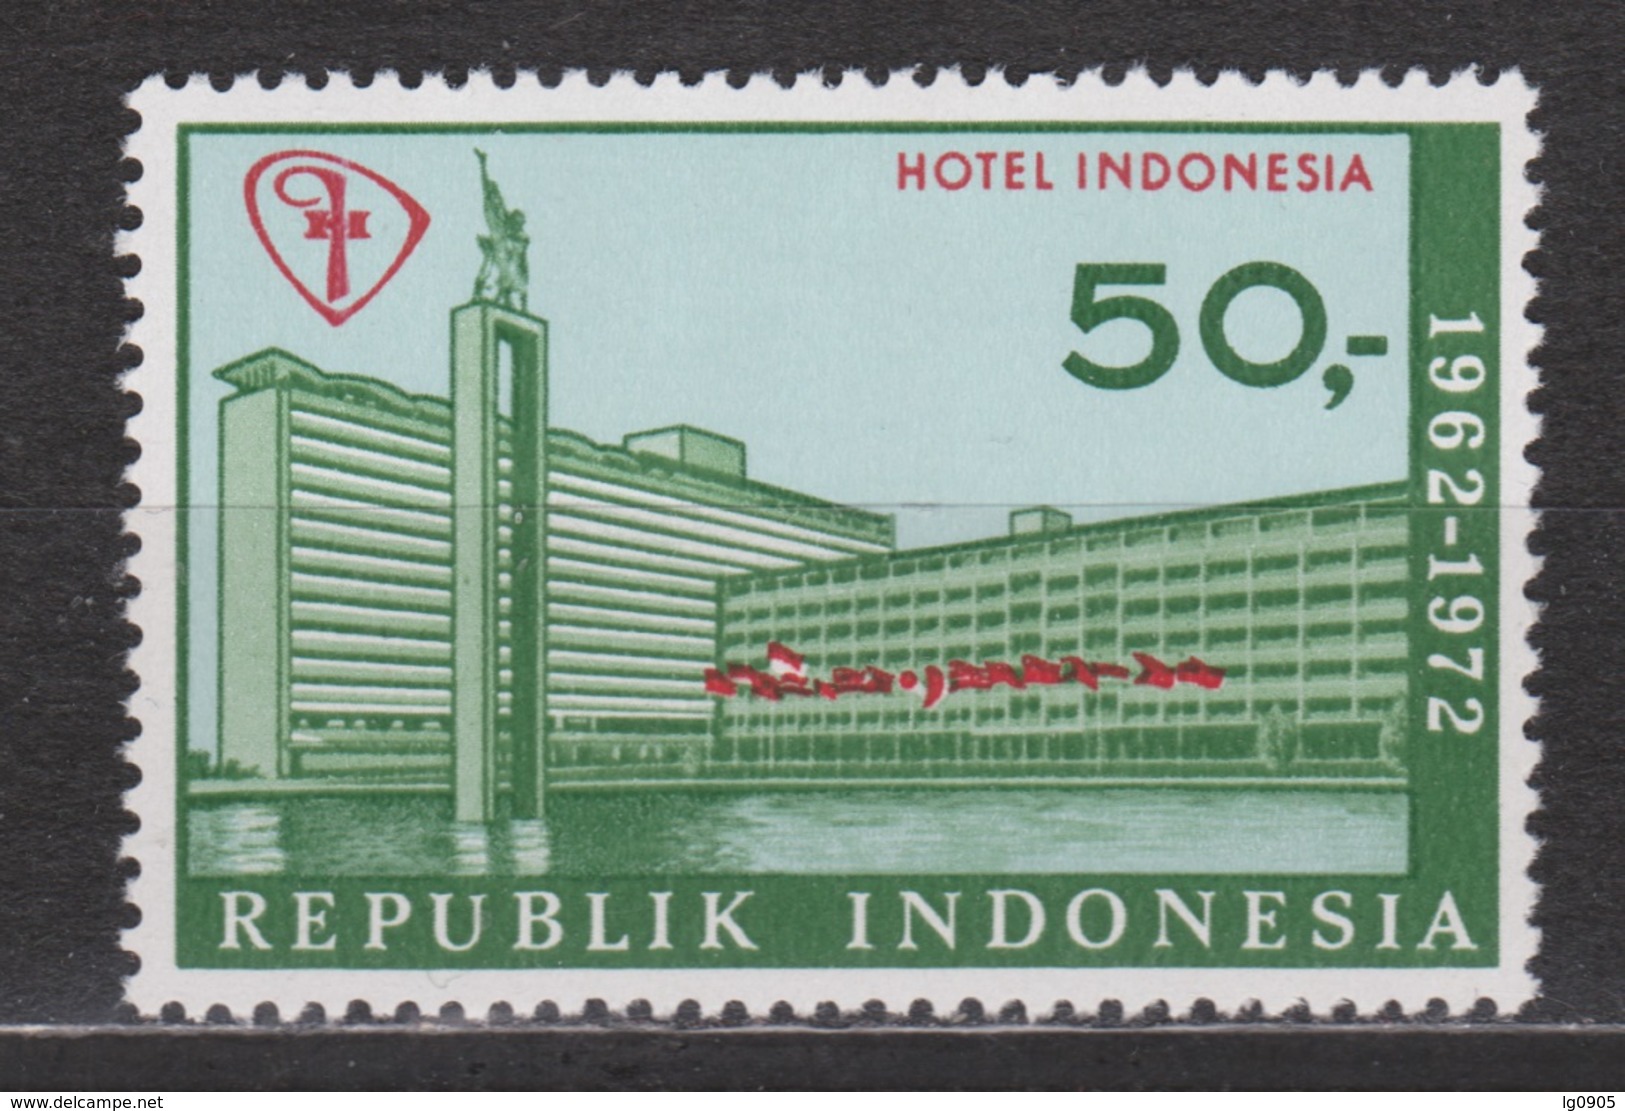 Indonesie 719 MNH 10 Jaar Years Hotle Indonesia 1972 ;NOW MANY STAMPS INDONESIA VERY CHEAP - Indonesië